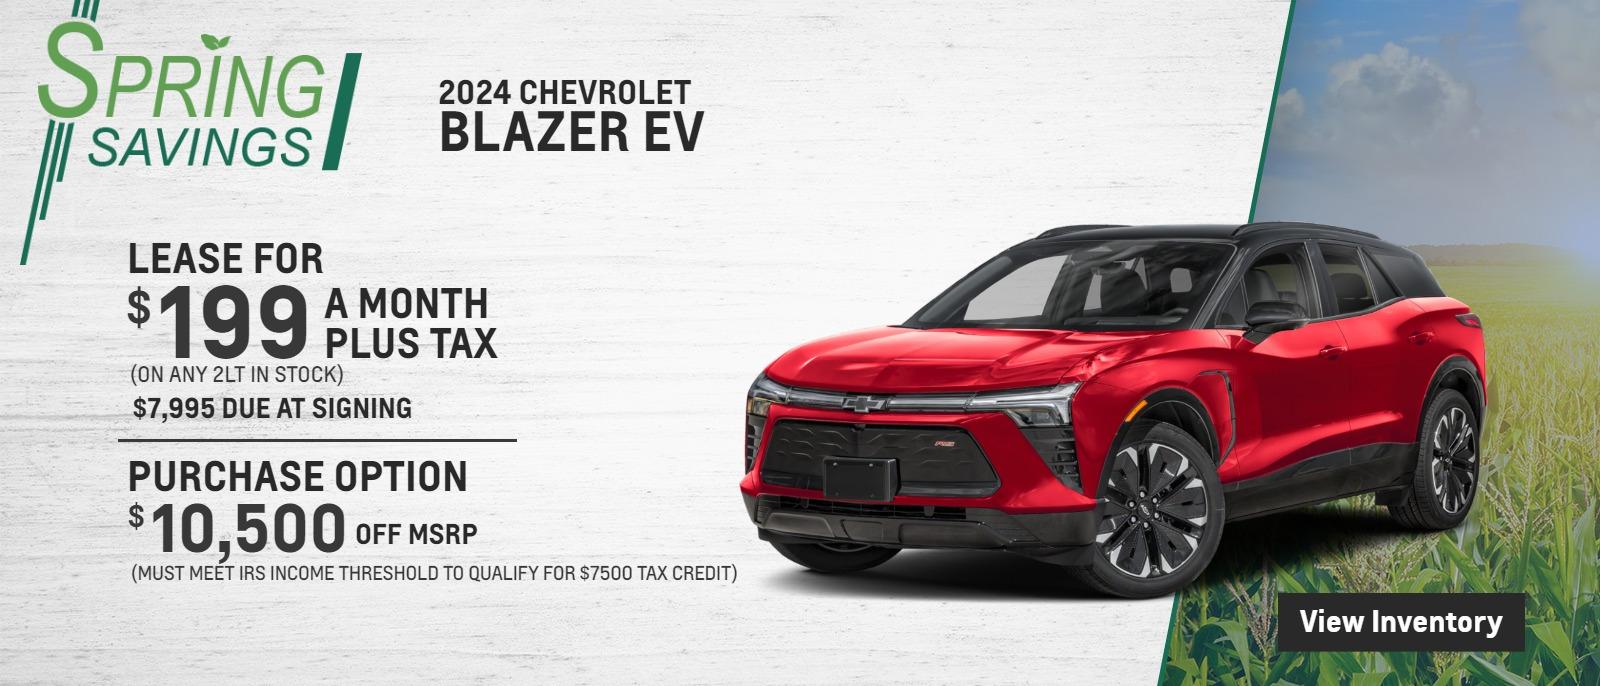 2024 BLAZER EV
LEASE $7995 DUE AT SIGNING $199 A MONTH PLUS TAX (ON ANY 2LT IN STOCK)
PURCHASE OPTION $10,500 OFF MSRP (MUST MEET IRS INCOME THRESHOLD TO QUALIFY FOR $7500 TAX CREDIT)